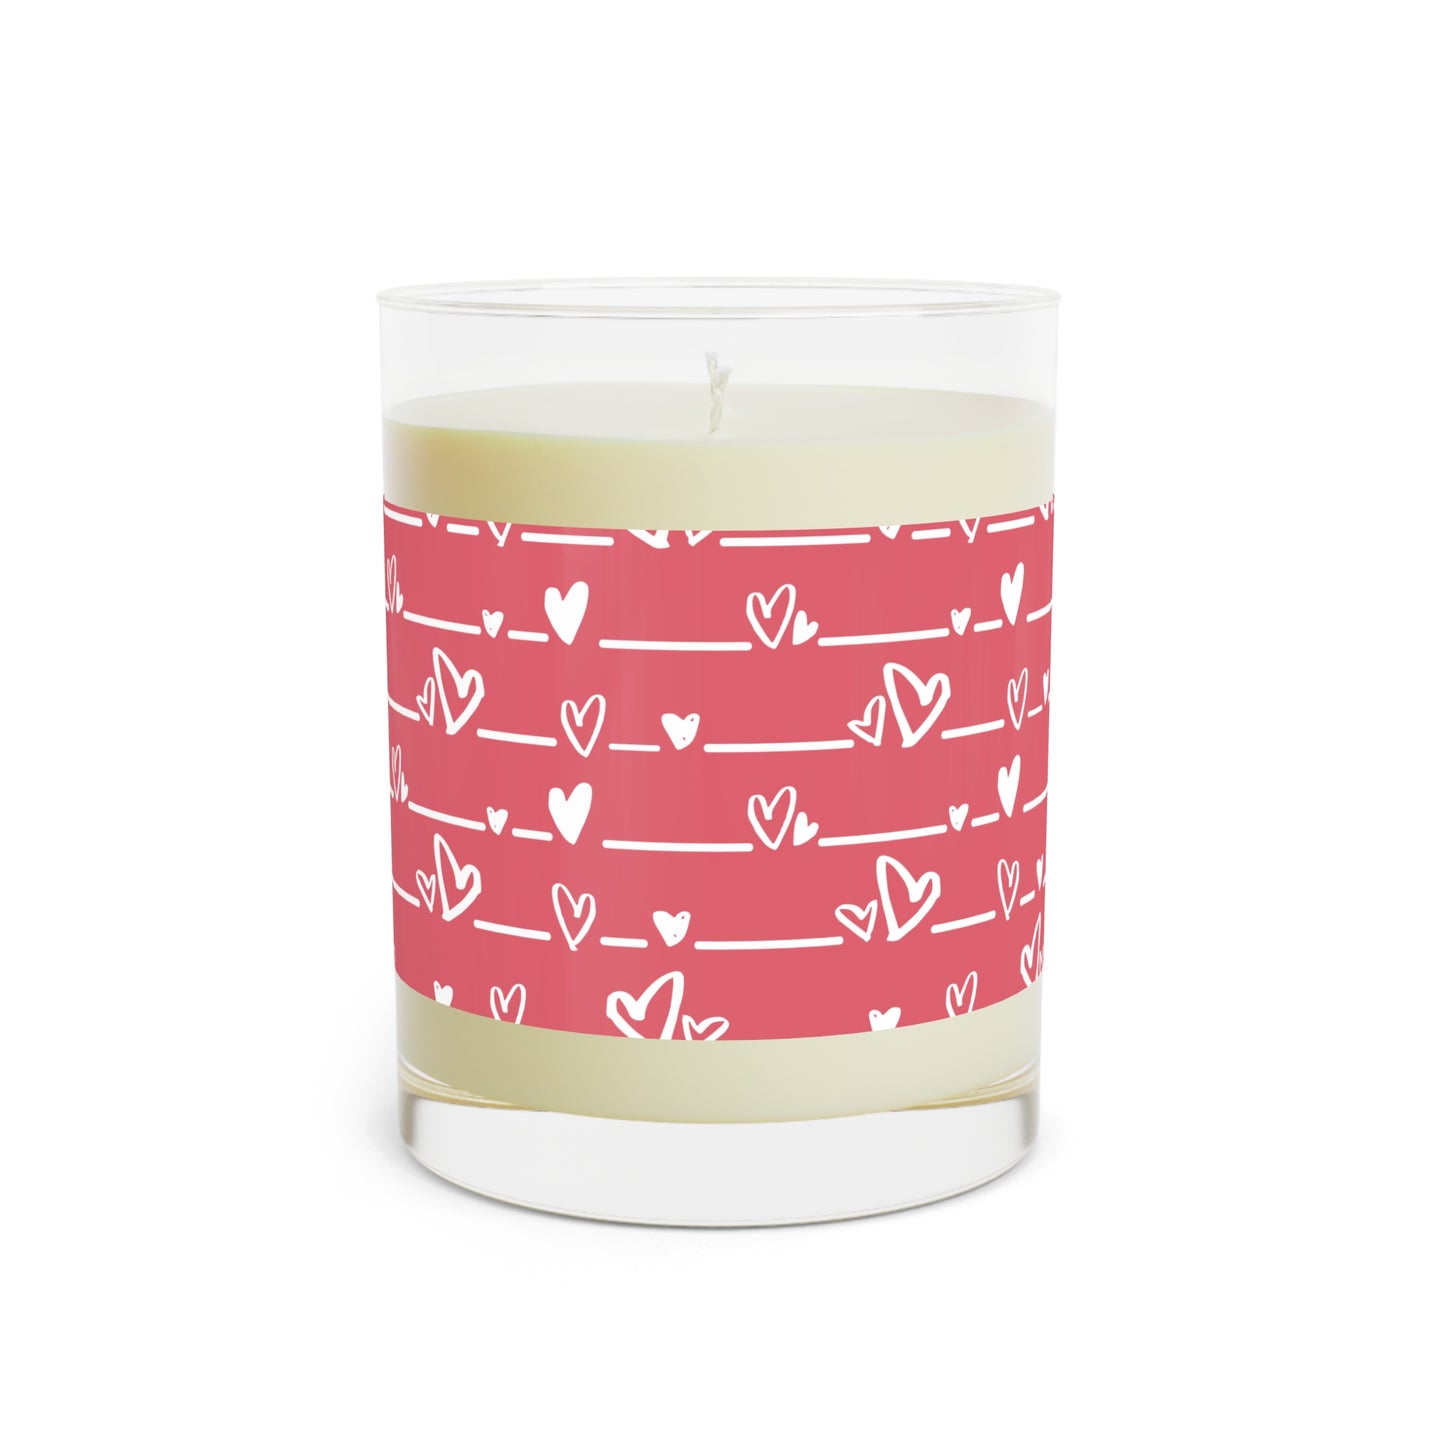 Heart Lovers Scented Soy Wax Aromatherapy Candle